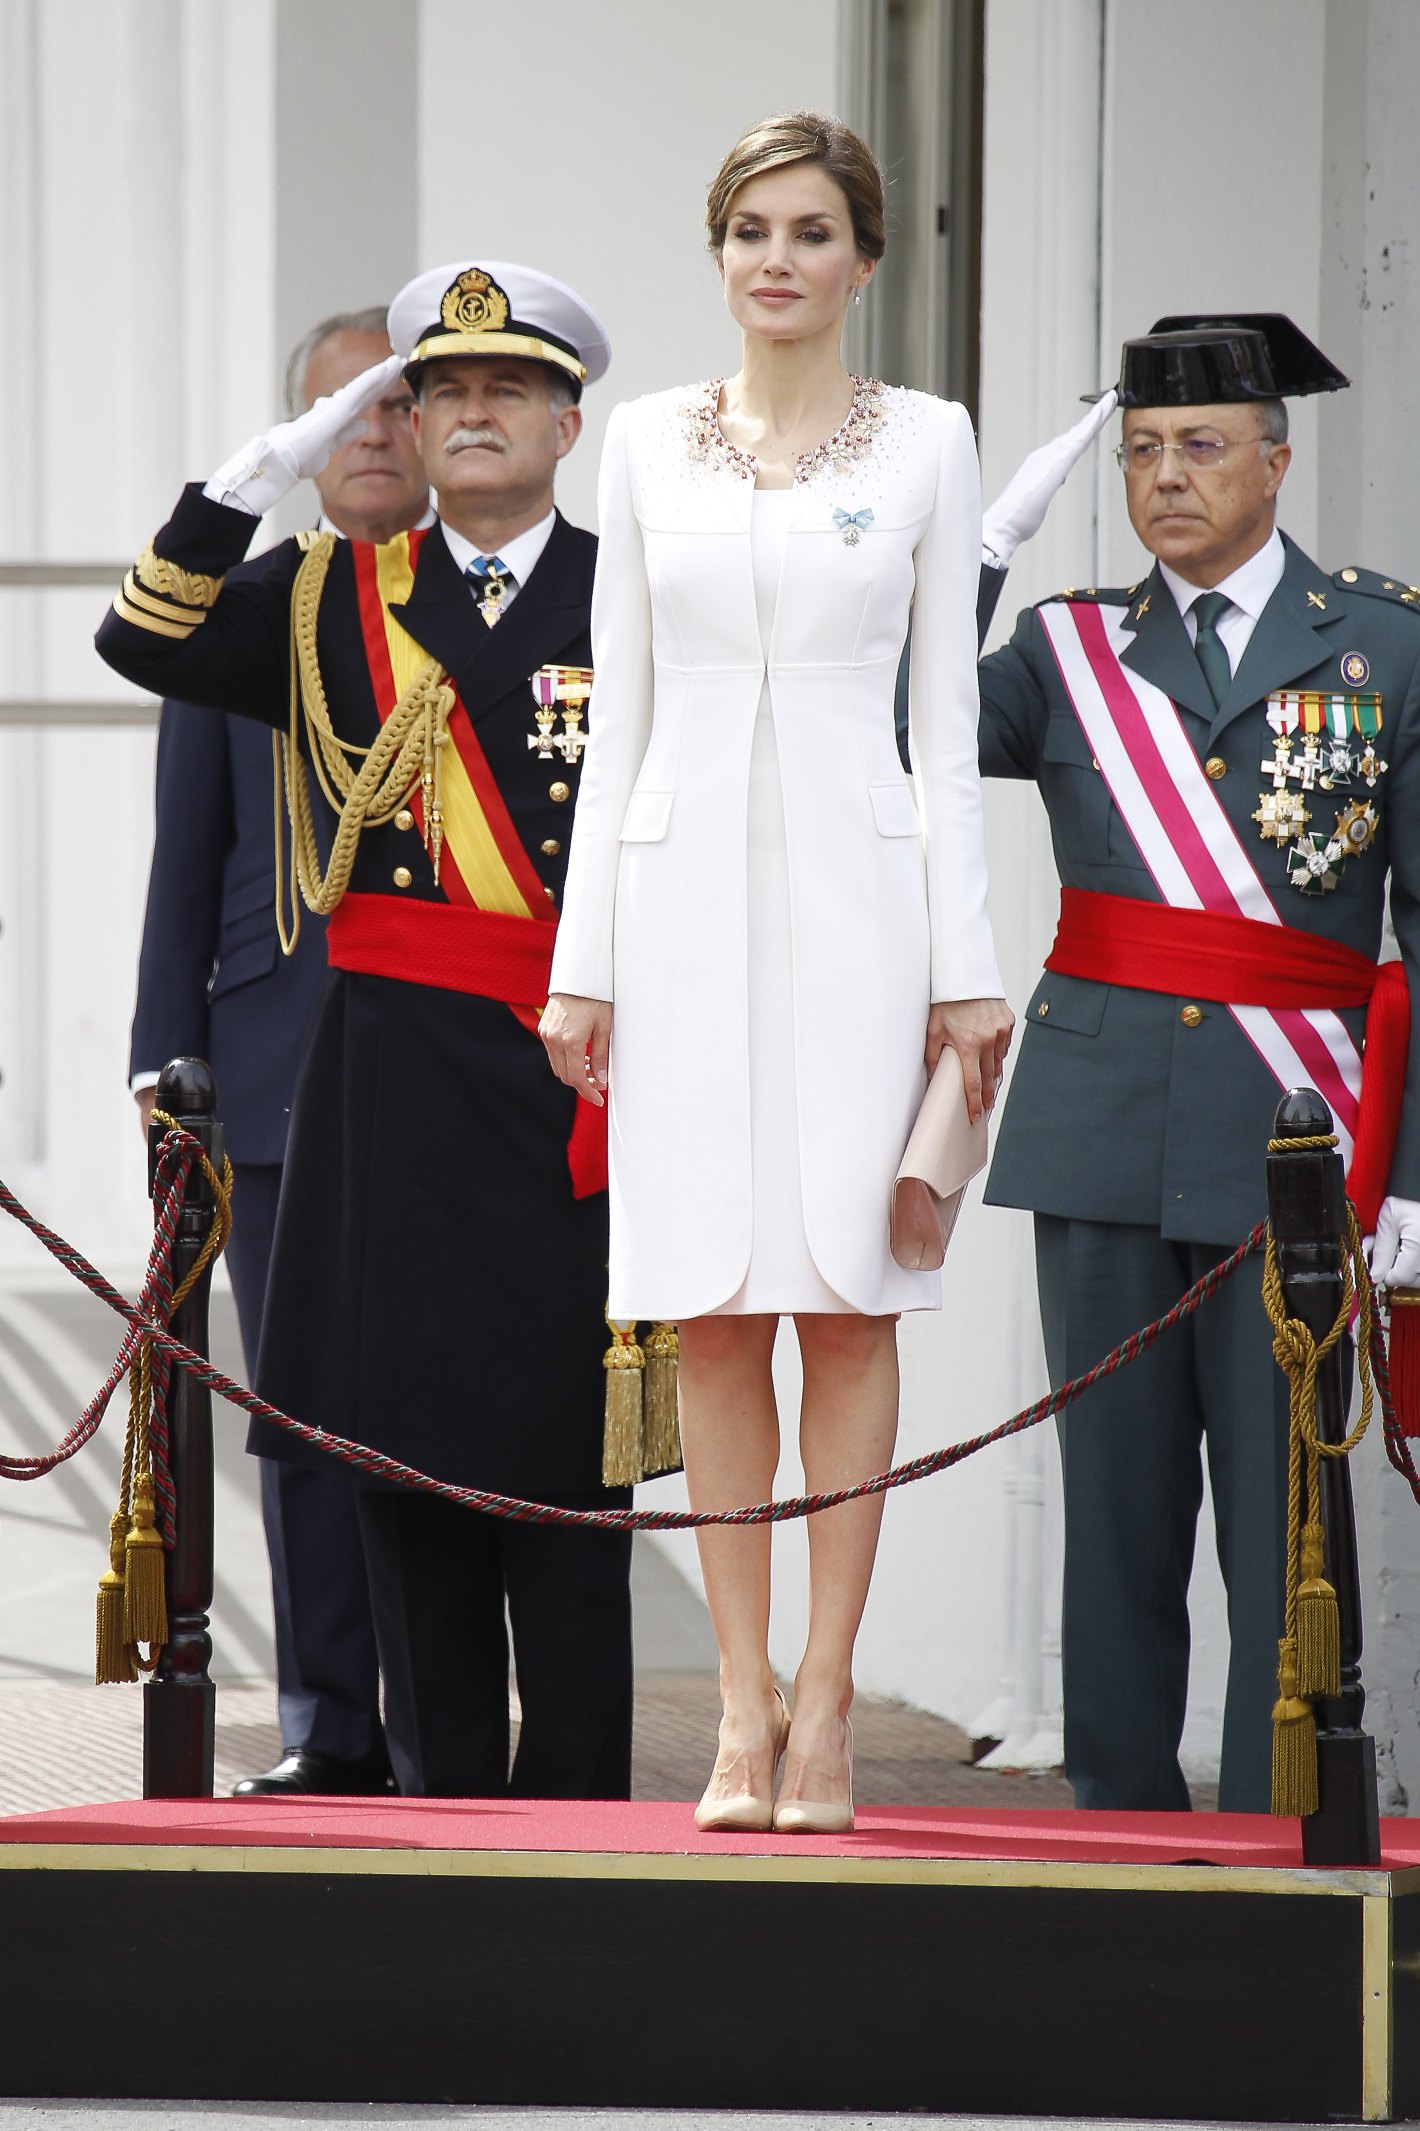 Mandatory Credit: Photo by Miguel Cordoba/DYDPPA/REX/Shutterstock (4771006g) Queen Letizia Queen Letizia National Flag delivery to the Guardia Civil in Vitoria-Gasteiz, Spain - 13 May 2015